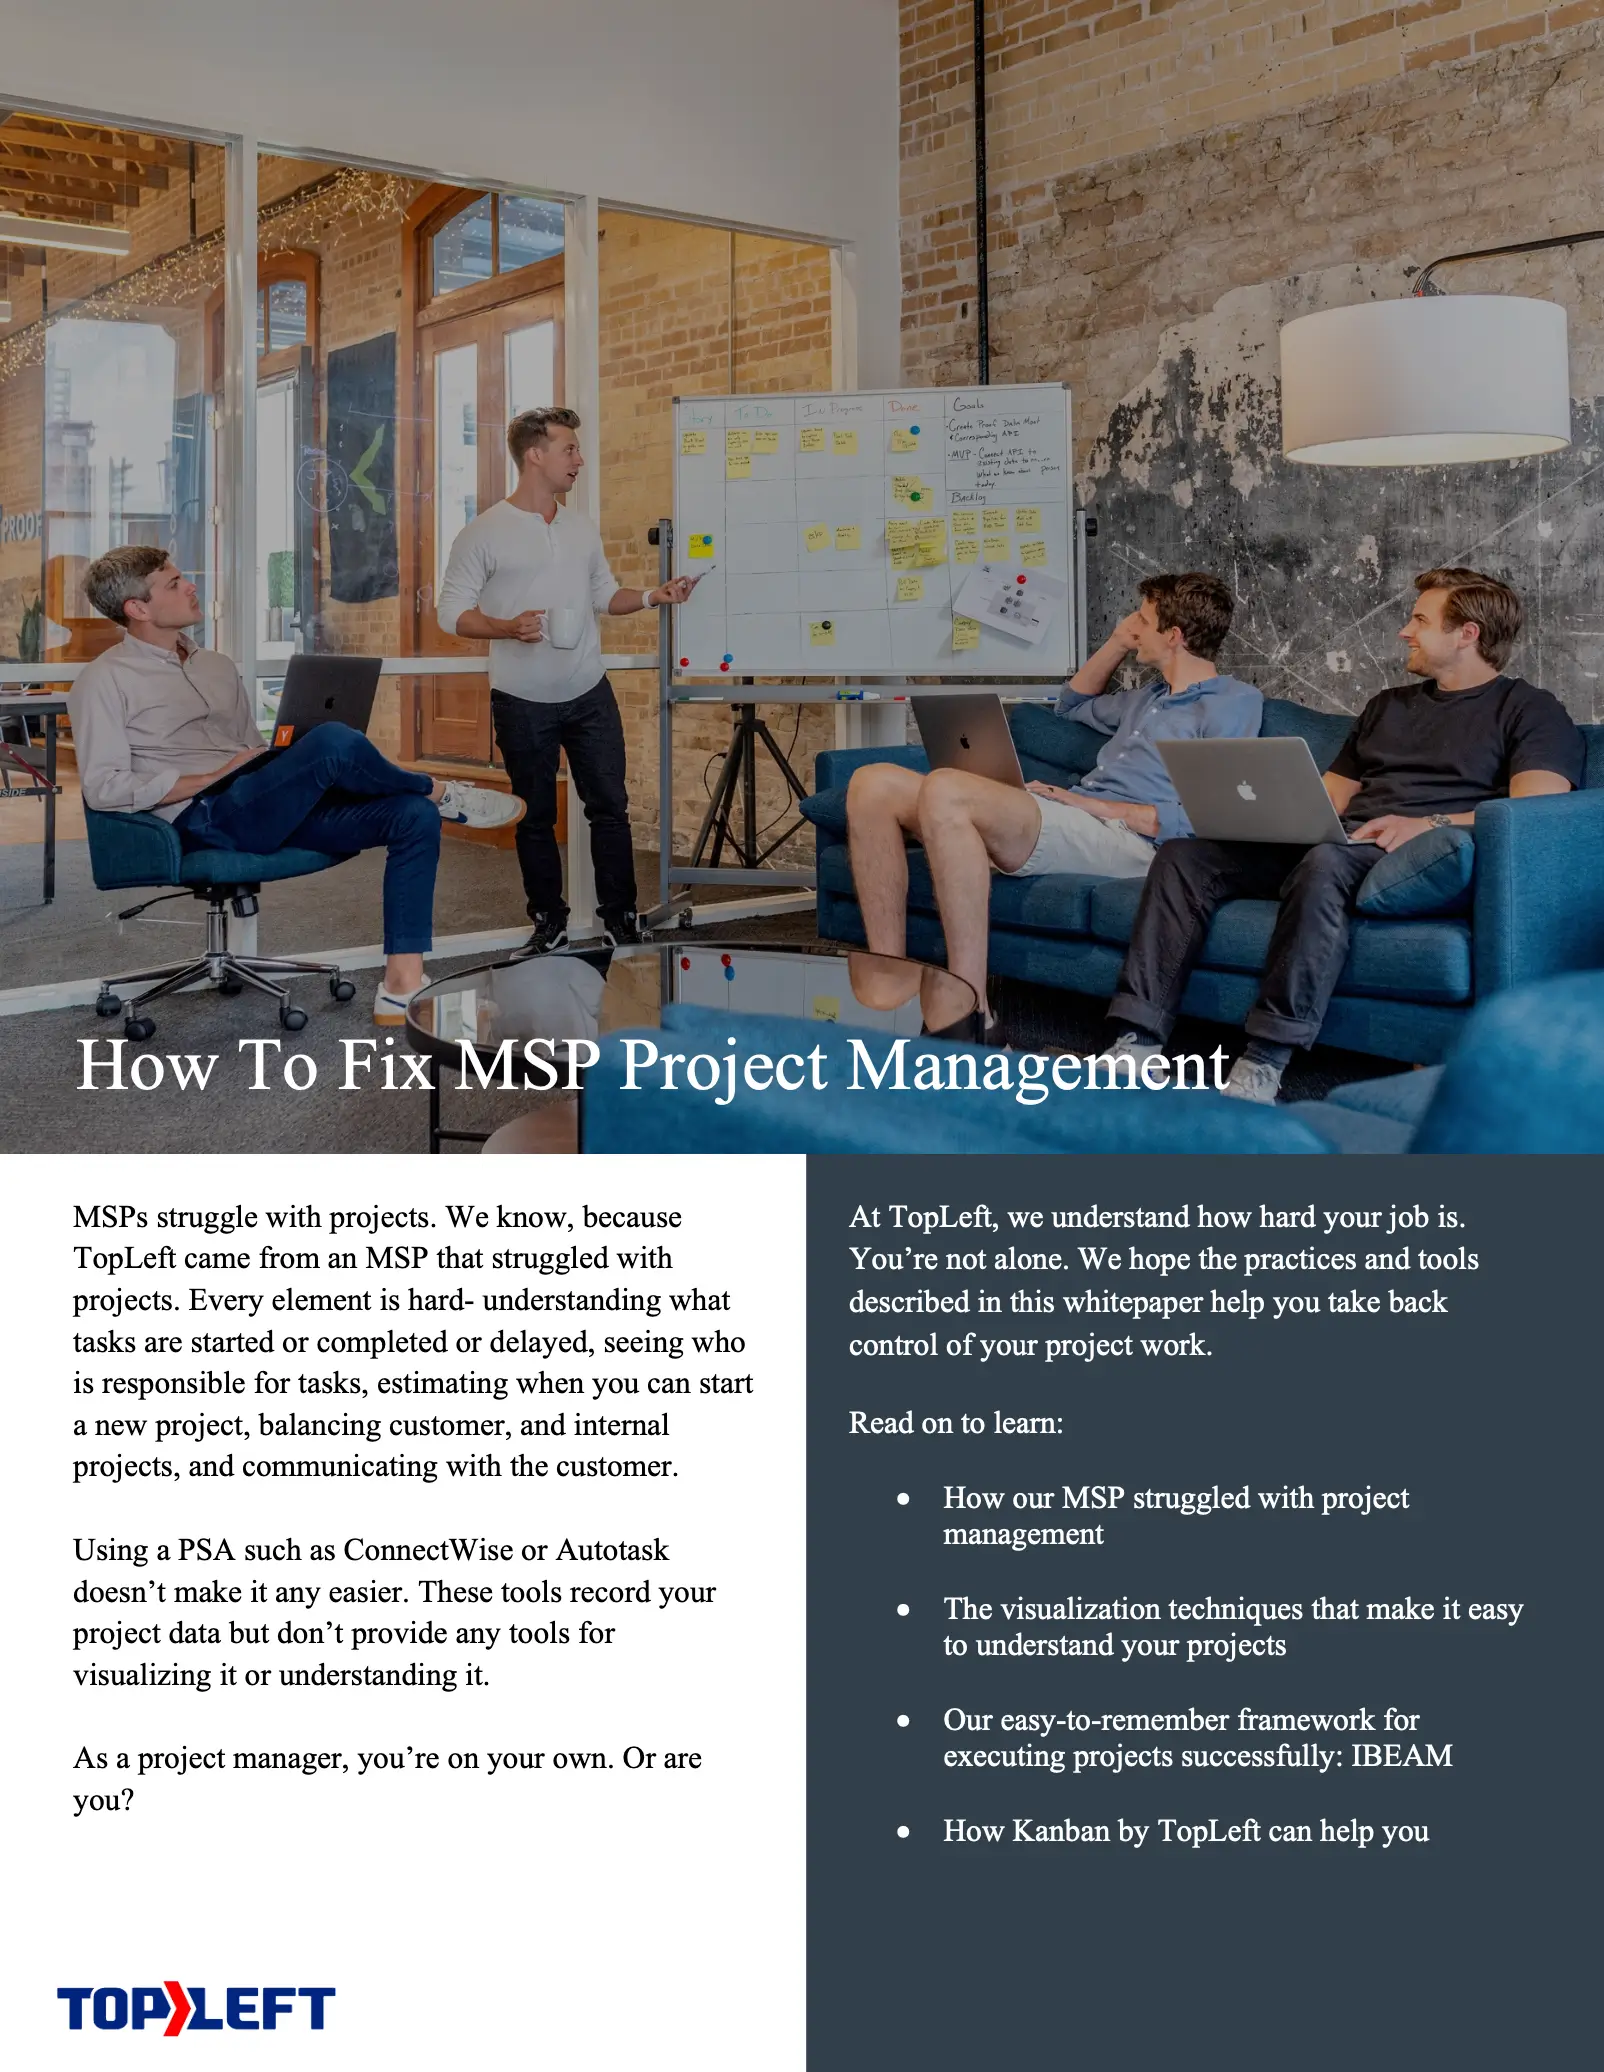 How To Fix MSP Project Management